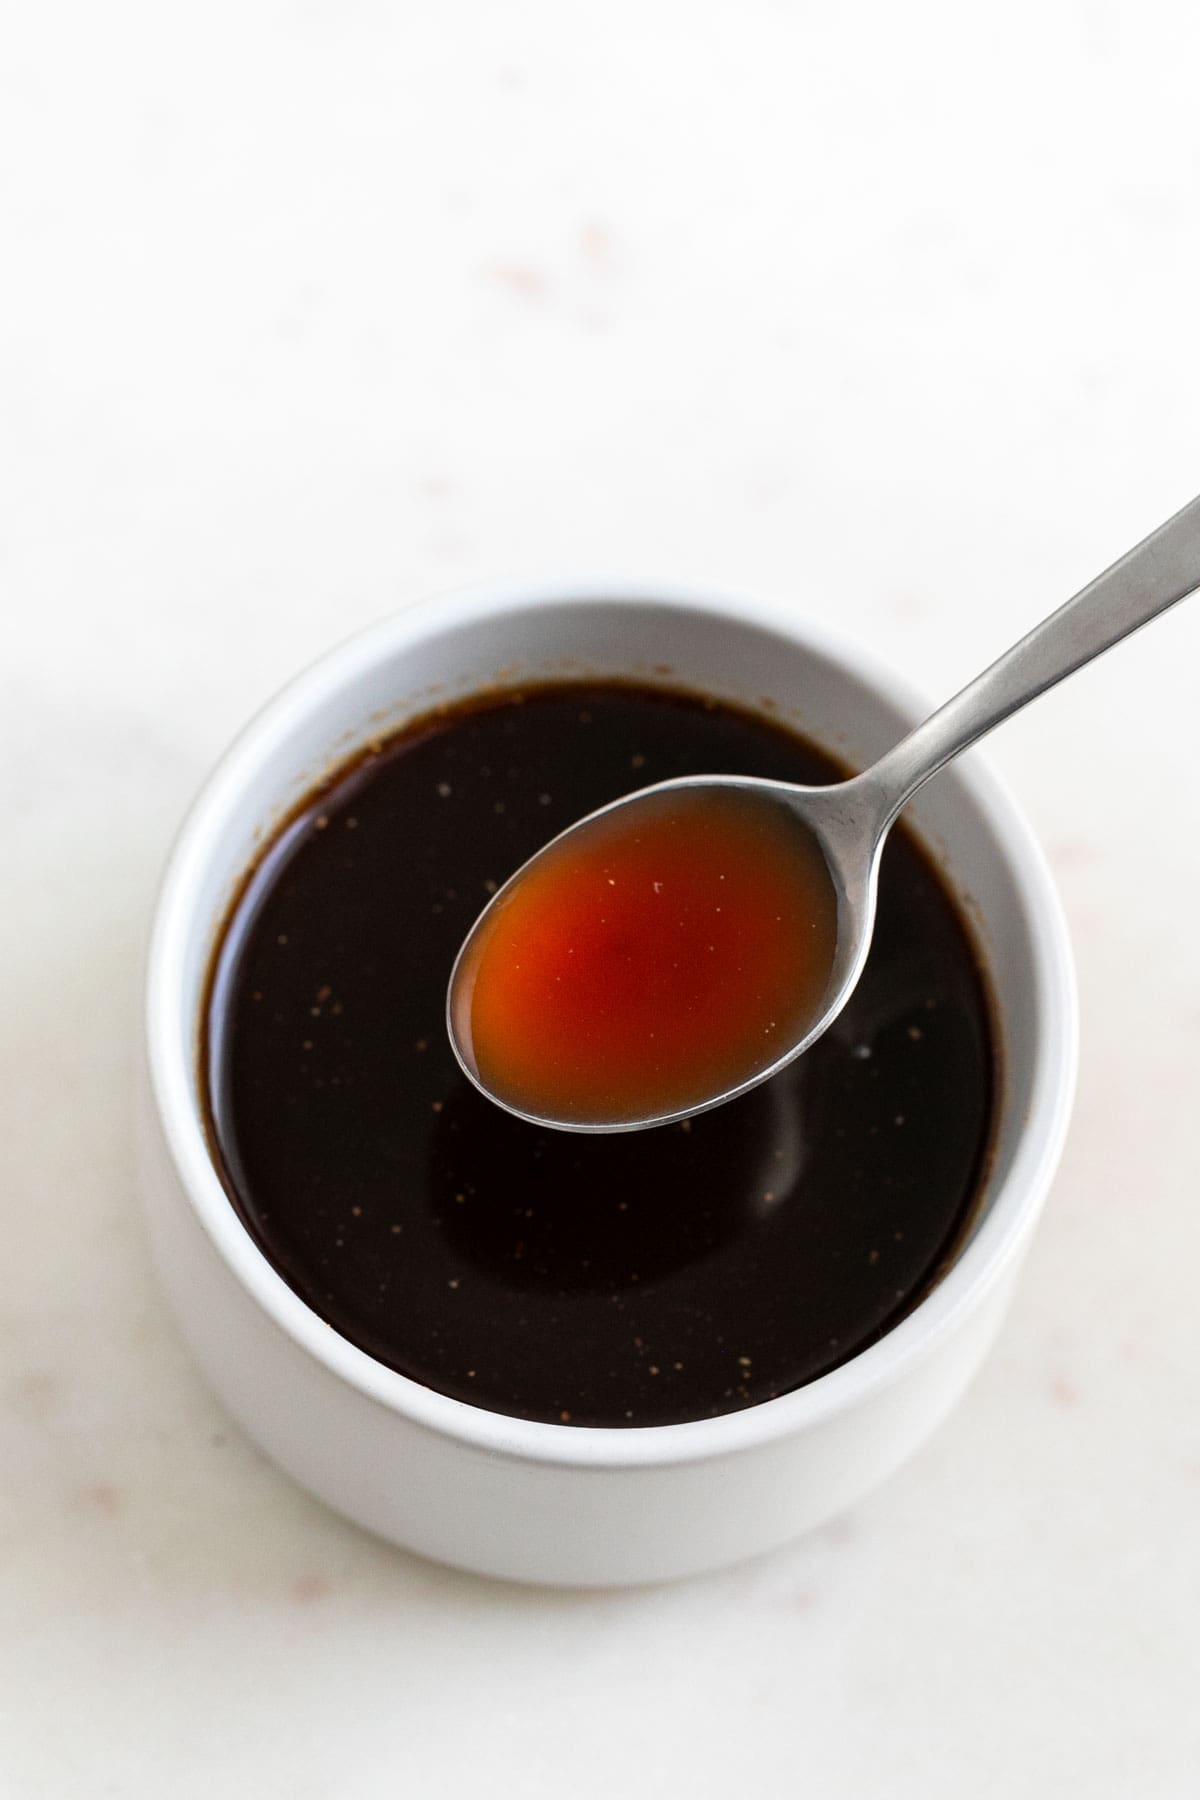 Spoon dipping into vegan Worcestershire sauce bowl.